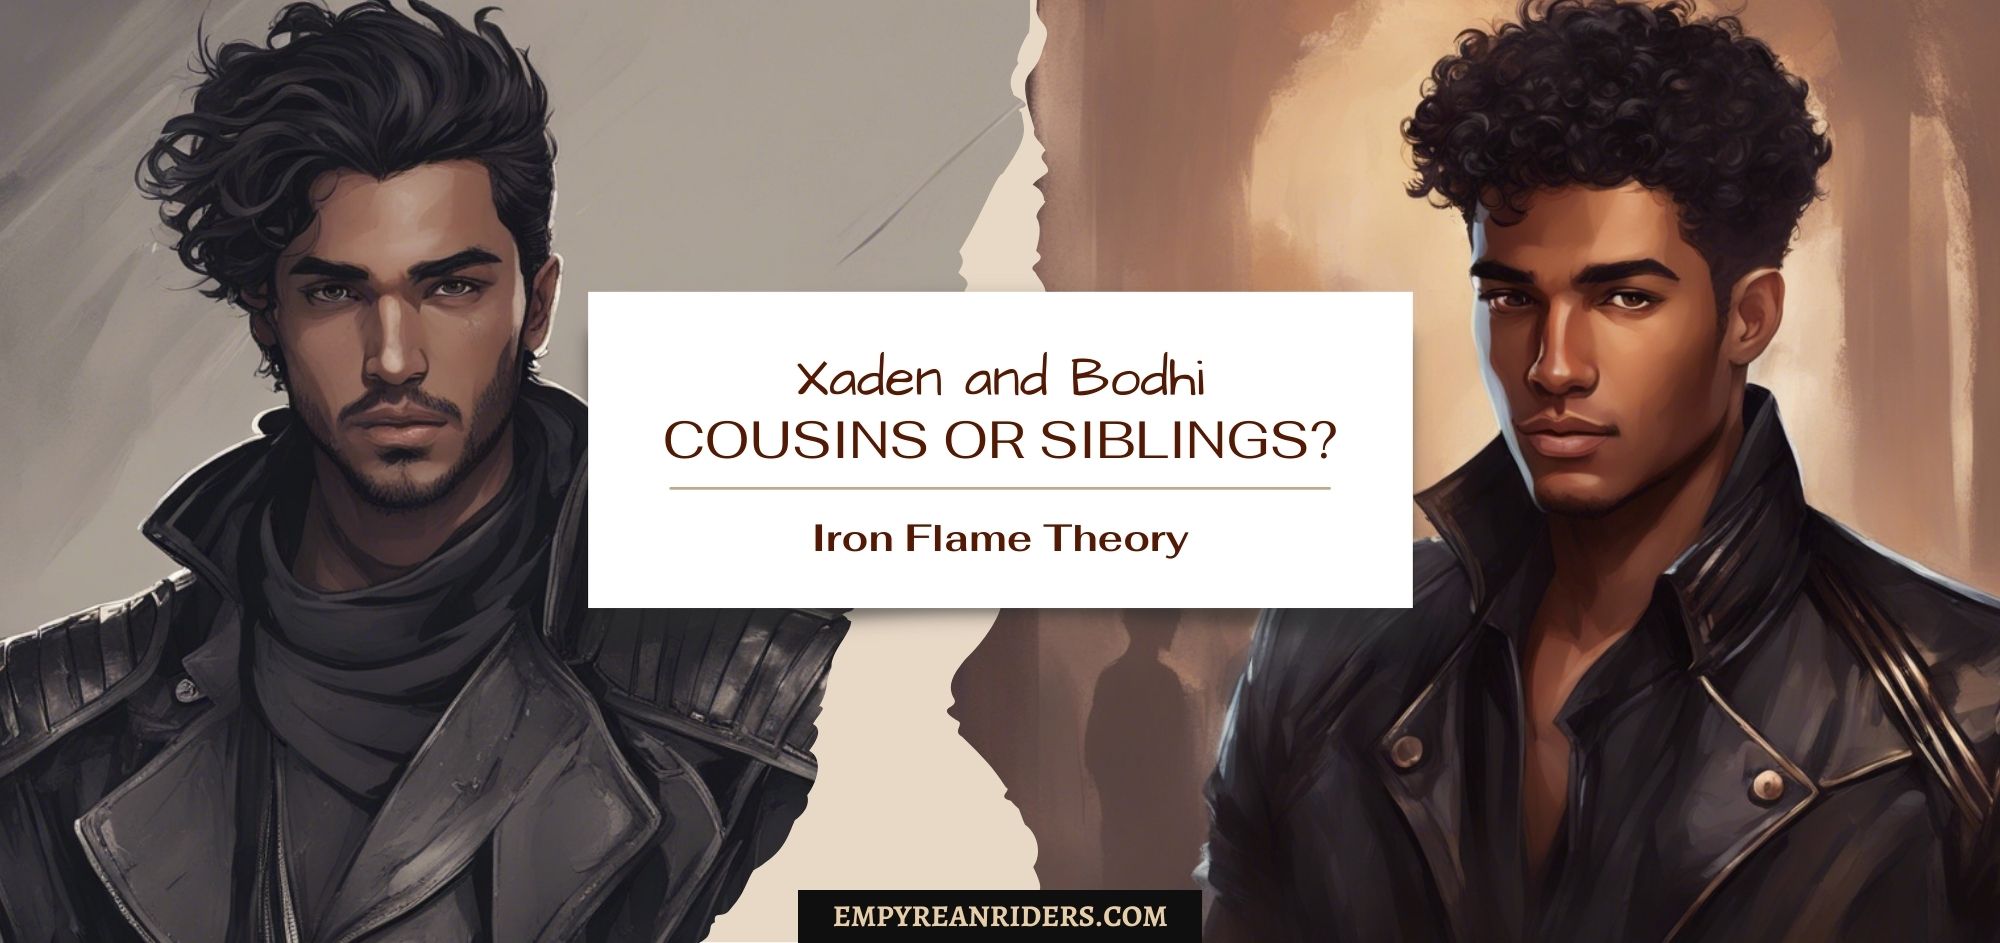 Iron Flame Theory: Xaden and Bodhi are siblings